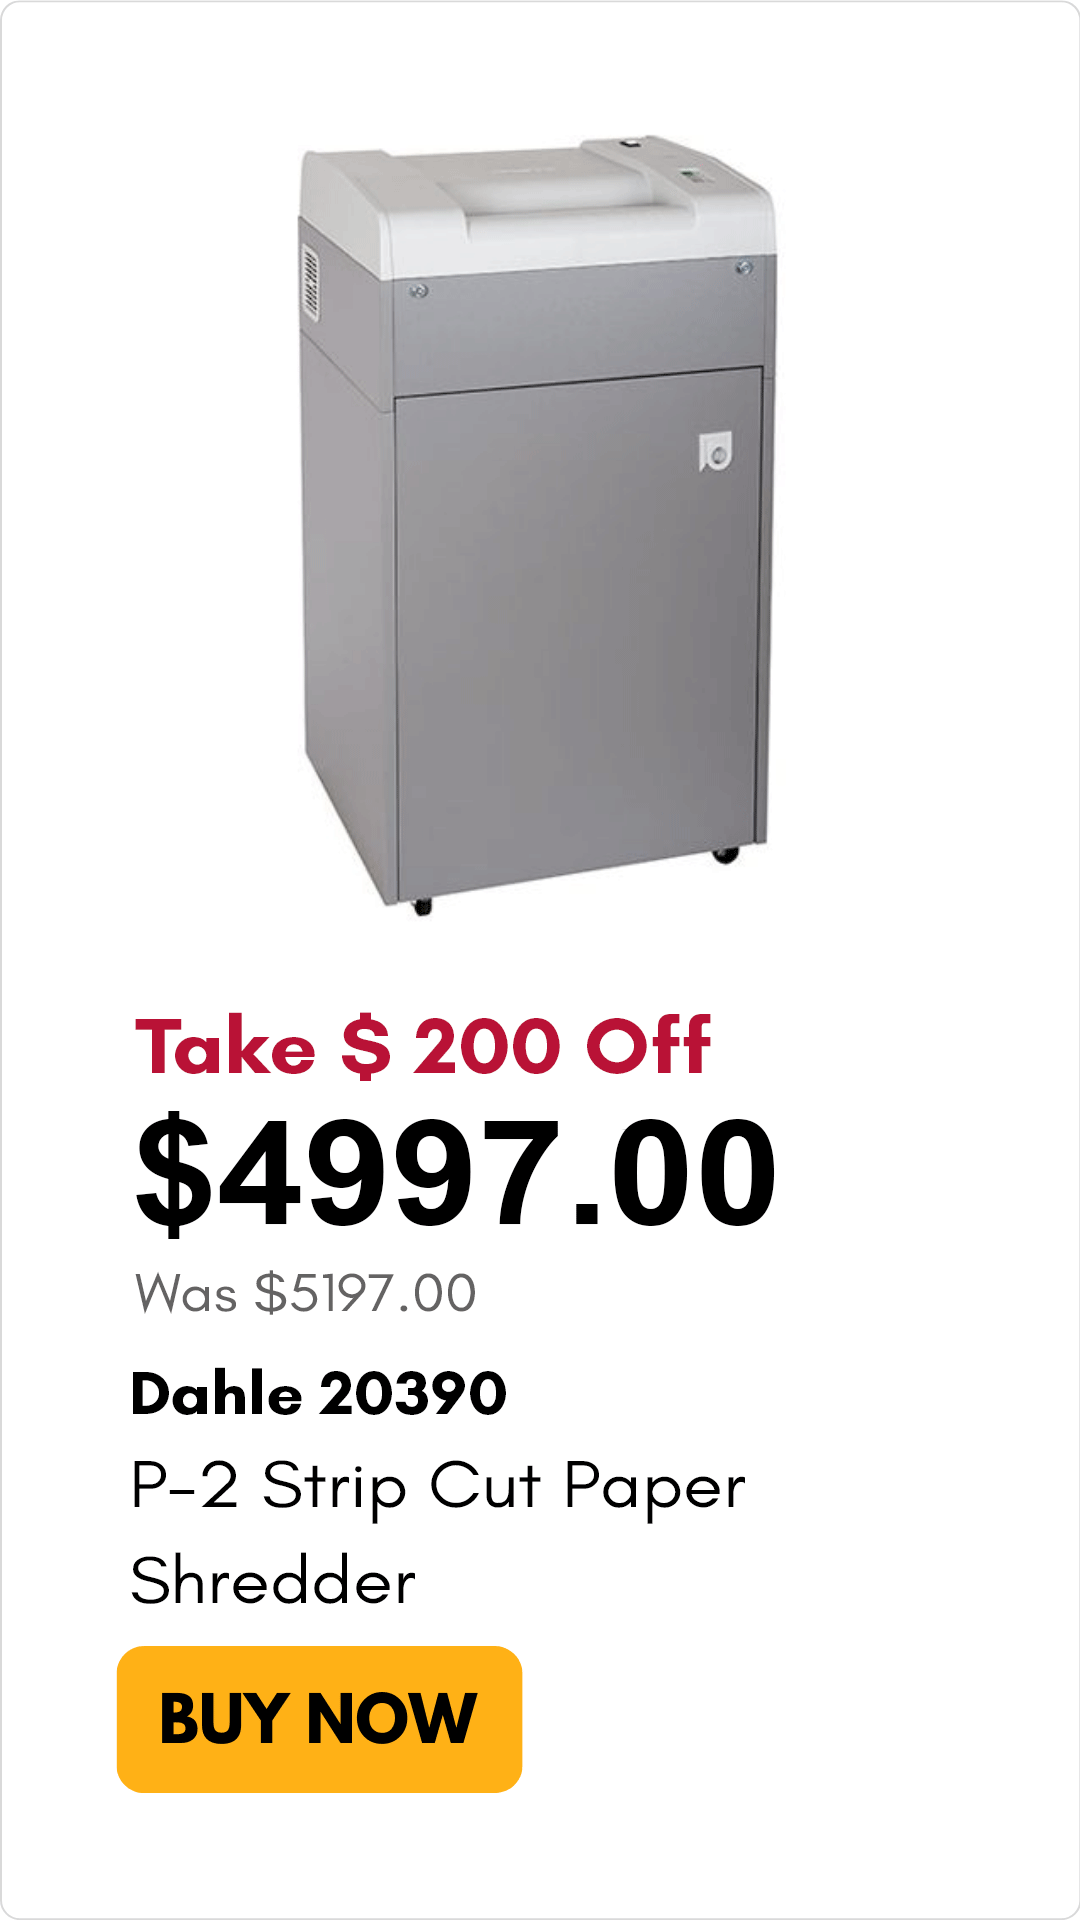 Dahle 20390 Level P-2 Strip Cut High Capacity Paper Shredder on Sales for $200 off.